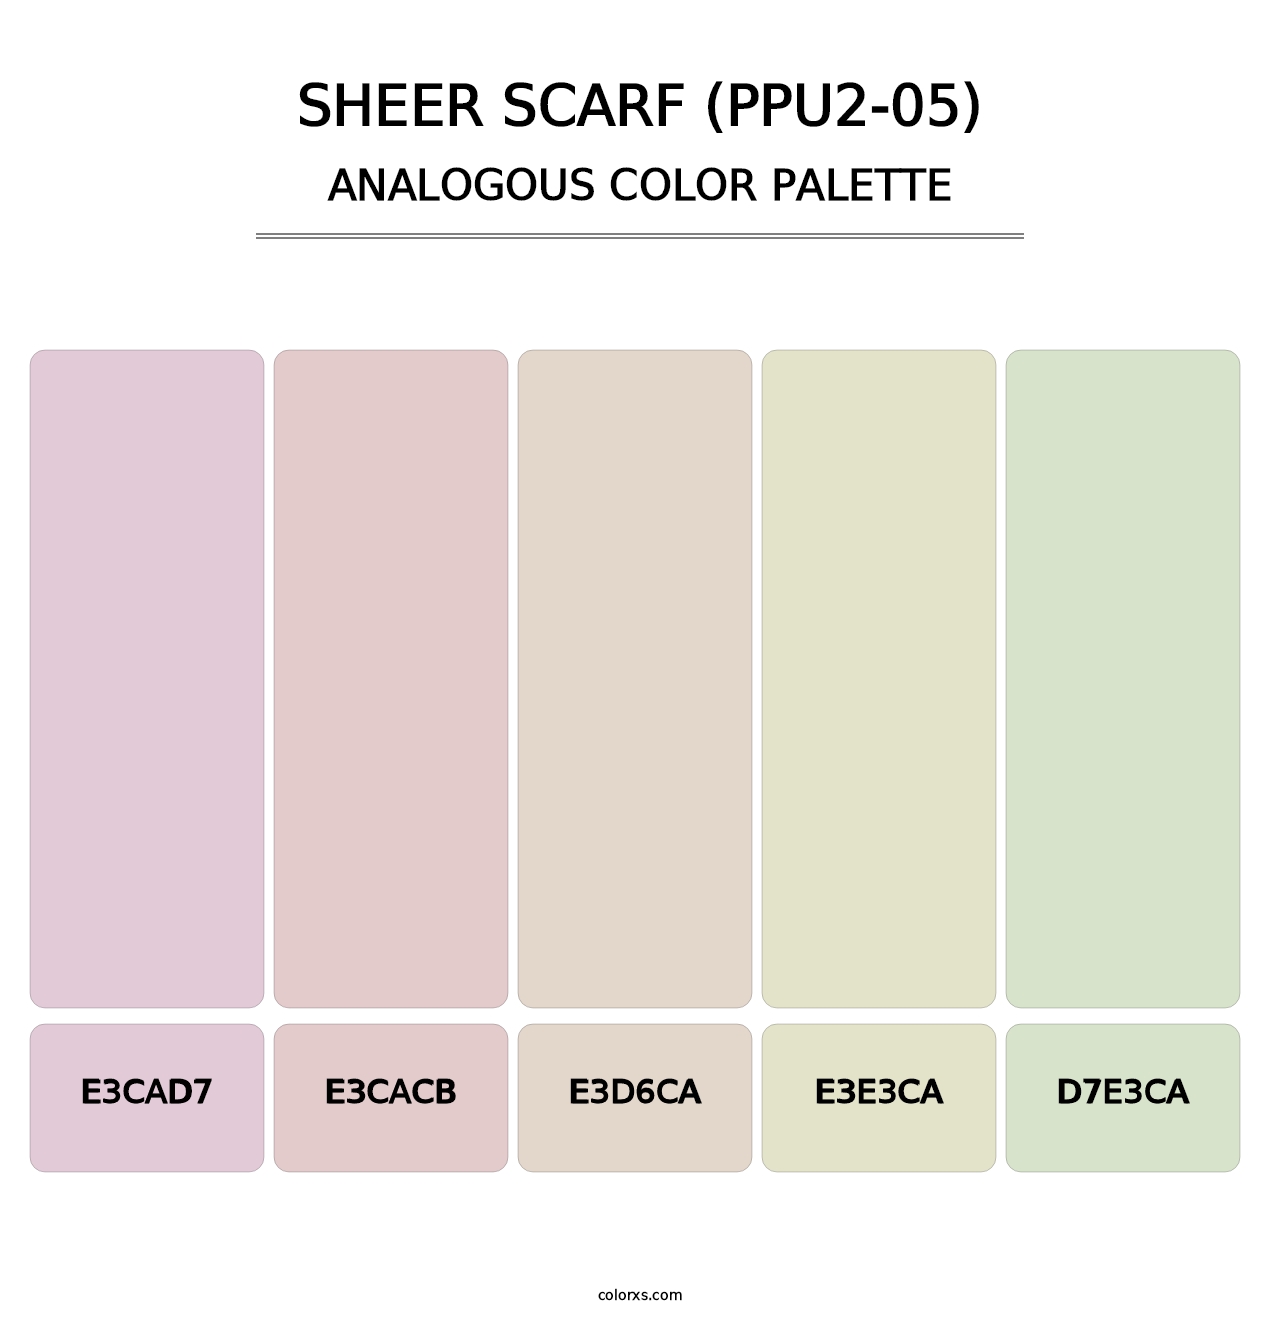 Sheer Scarf (PPU2-05) - Analogous Color Palette